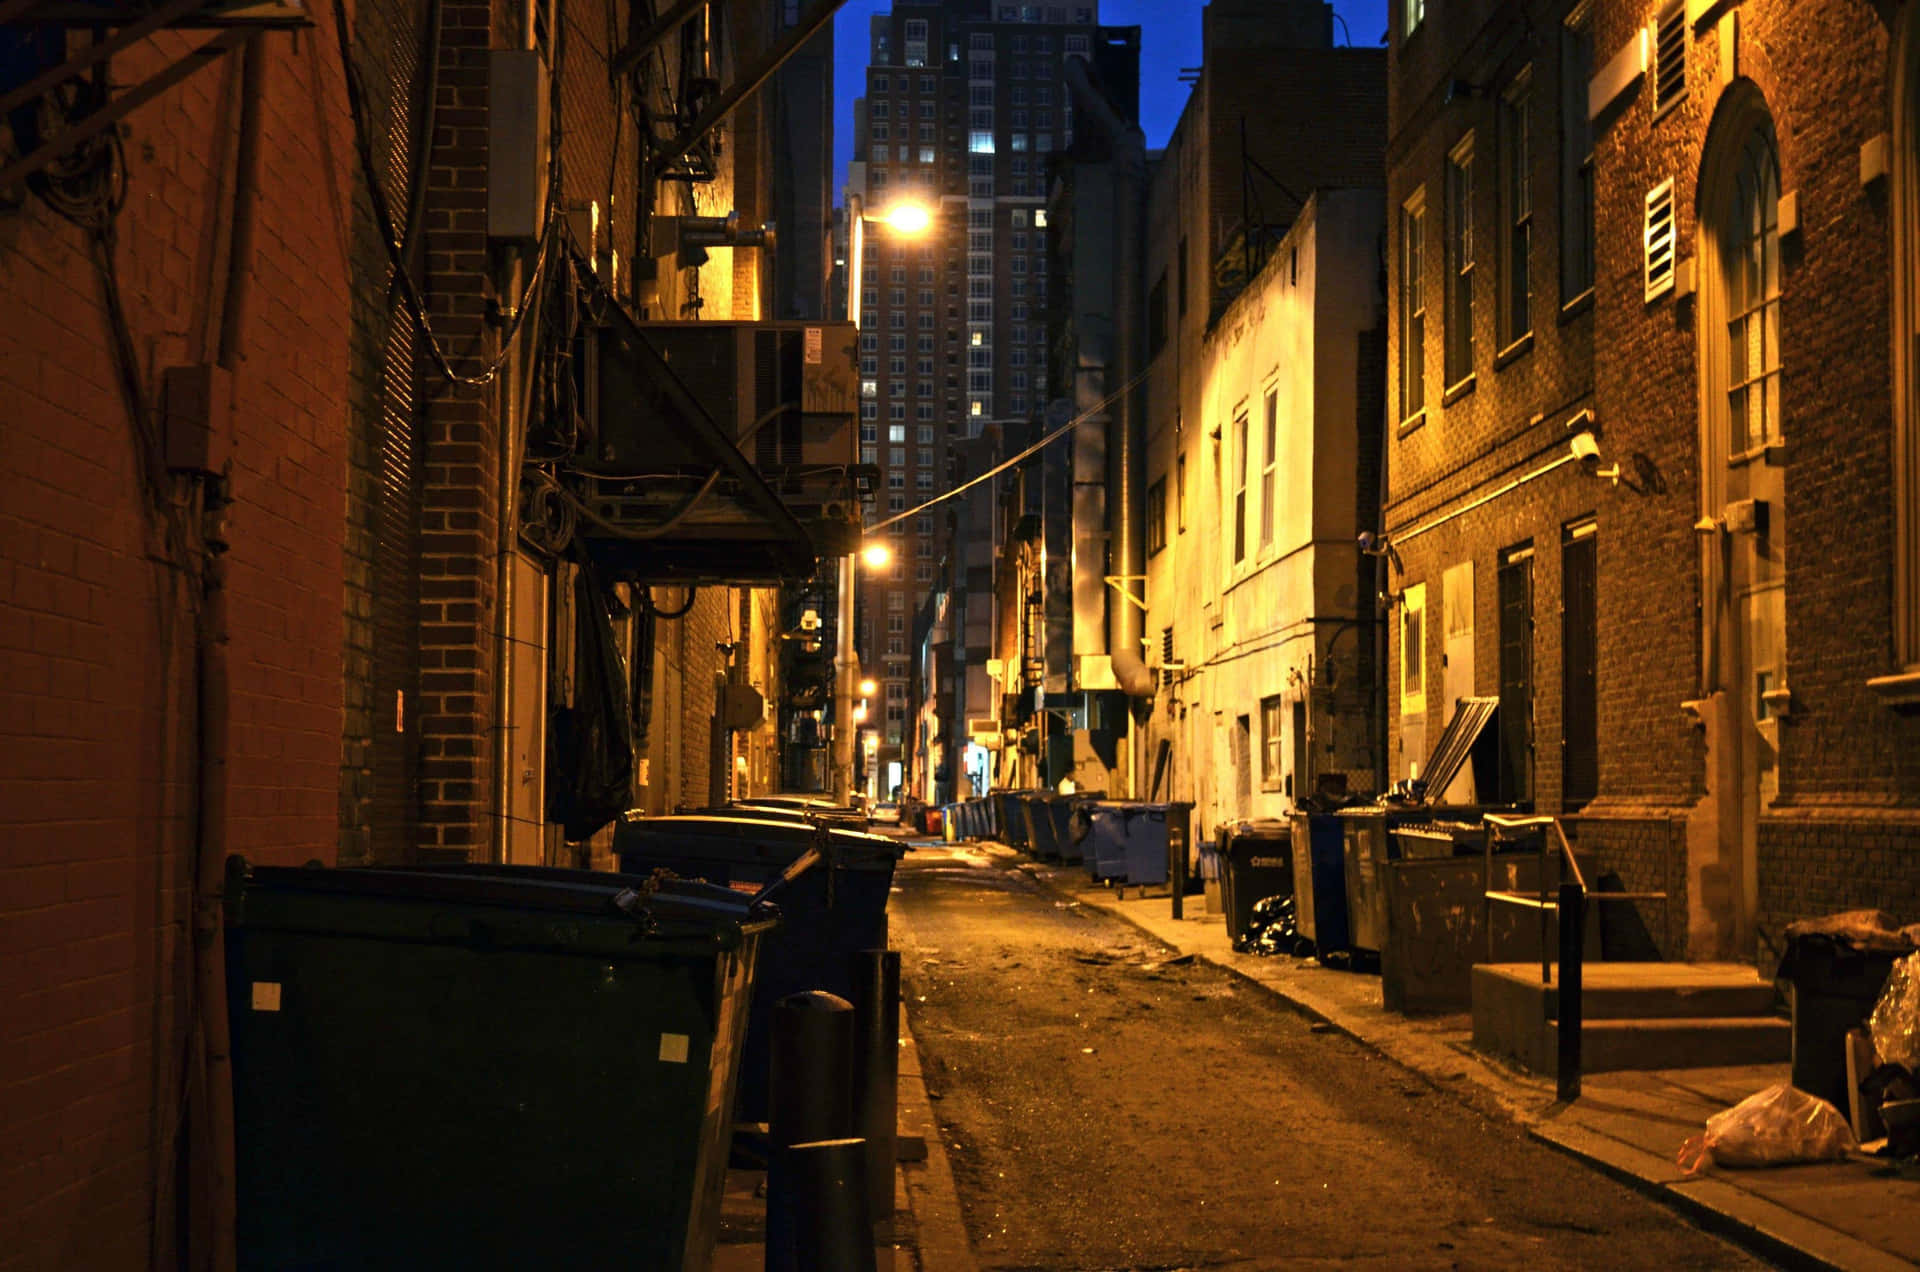 A Narrow Alleyway With A Trash Can